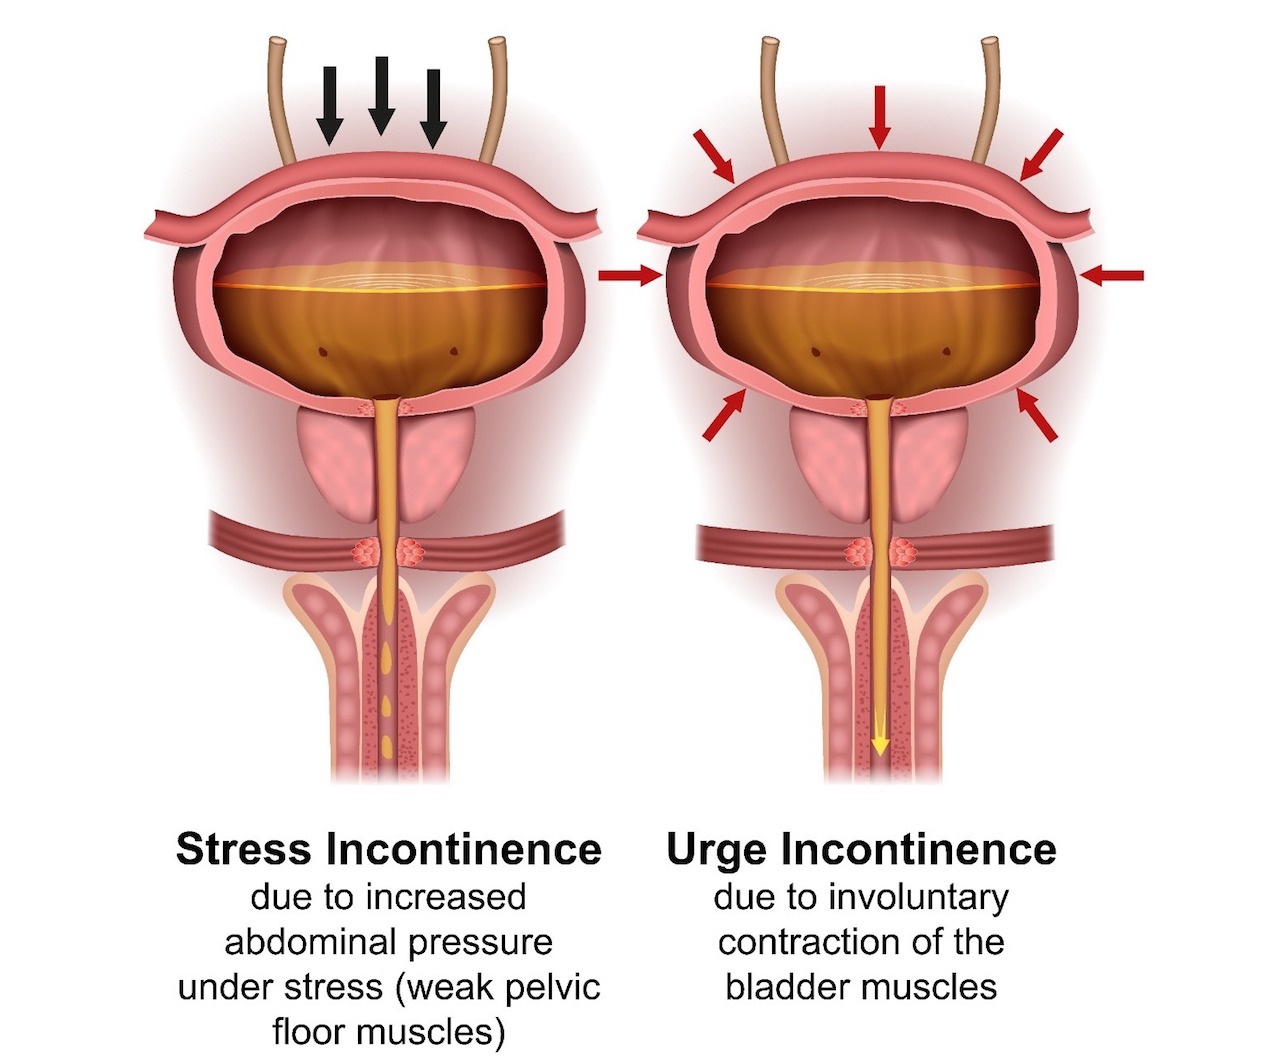 stress incontinence